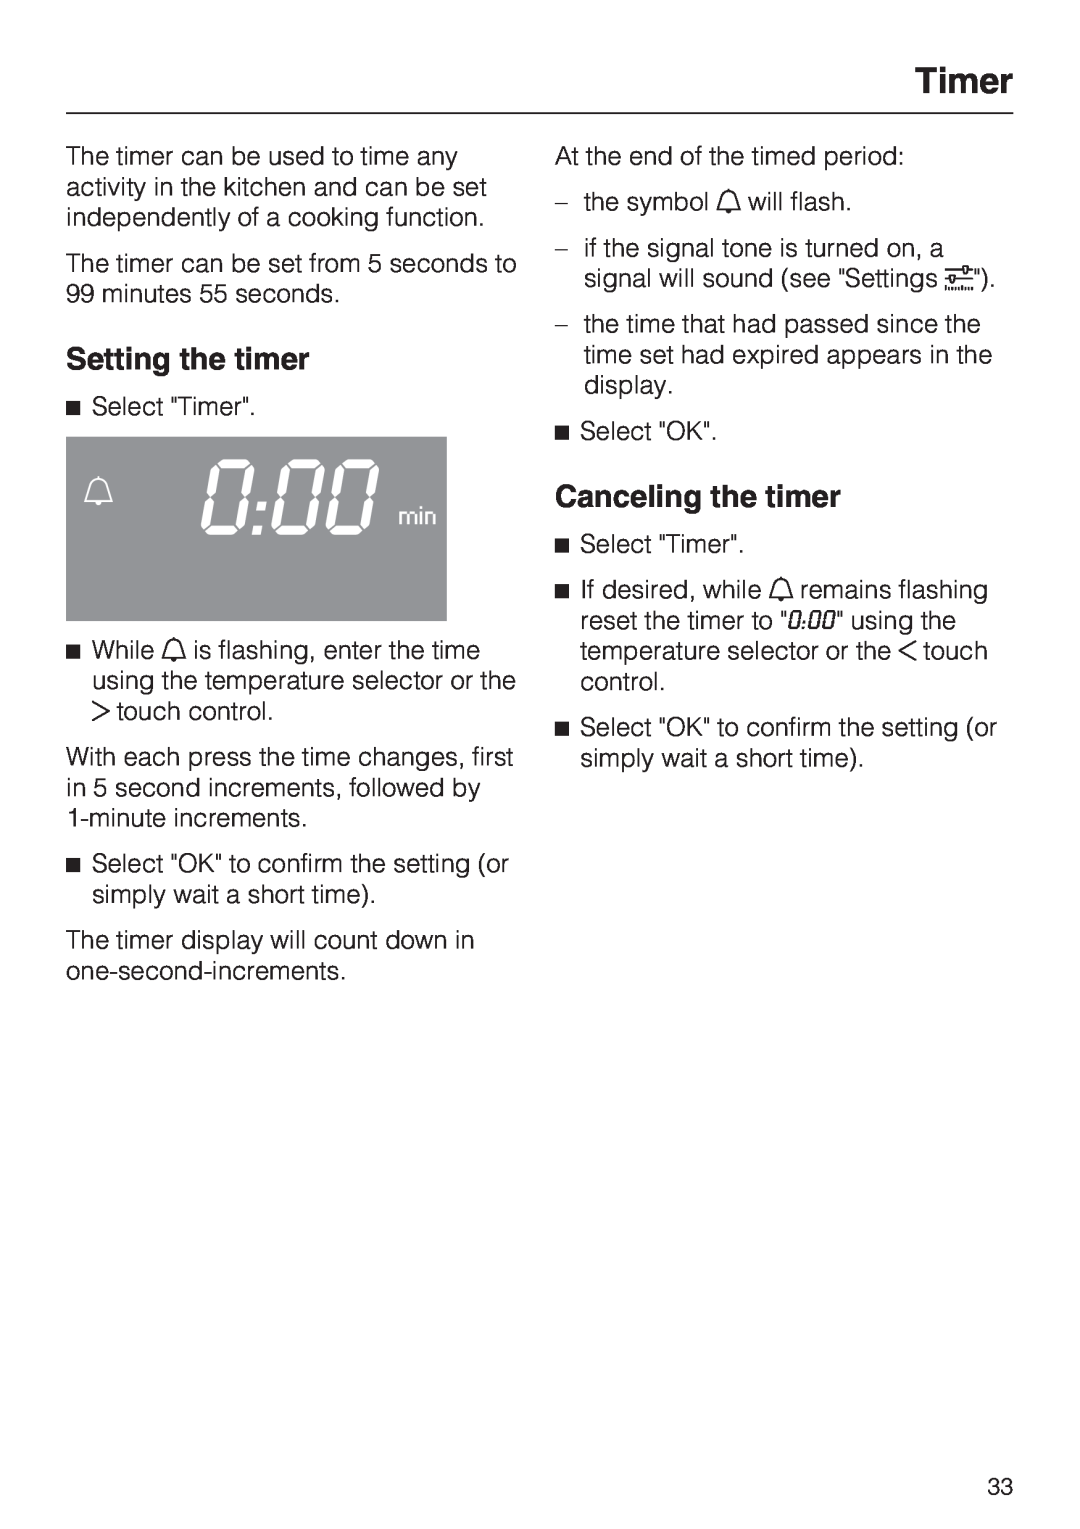 Miele H 4044 BM installation instructions Timer, Setting the timer, Canceling the timer, 000 min 